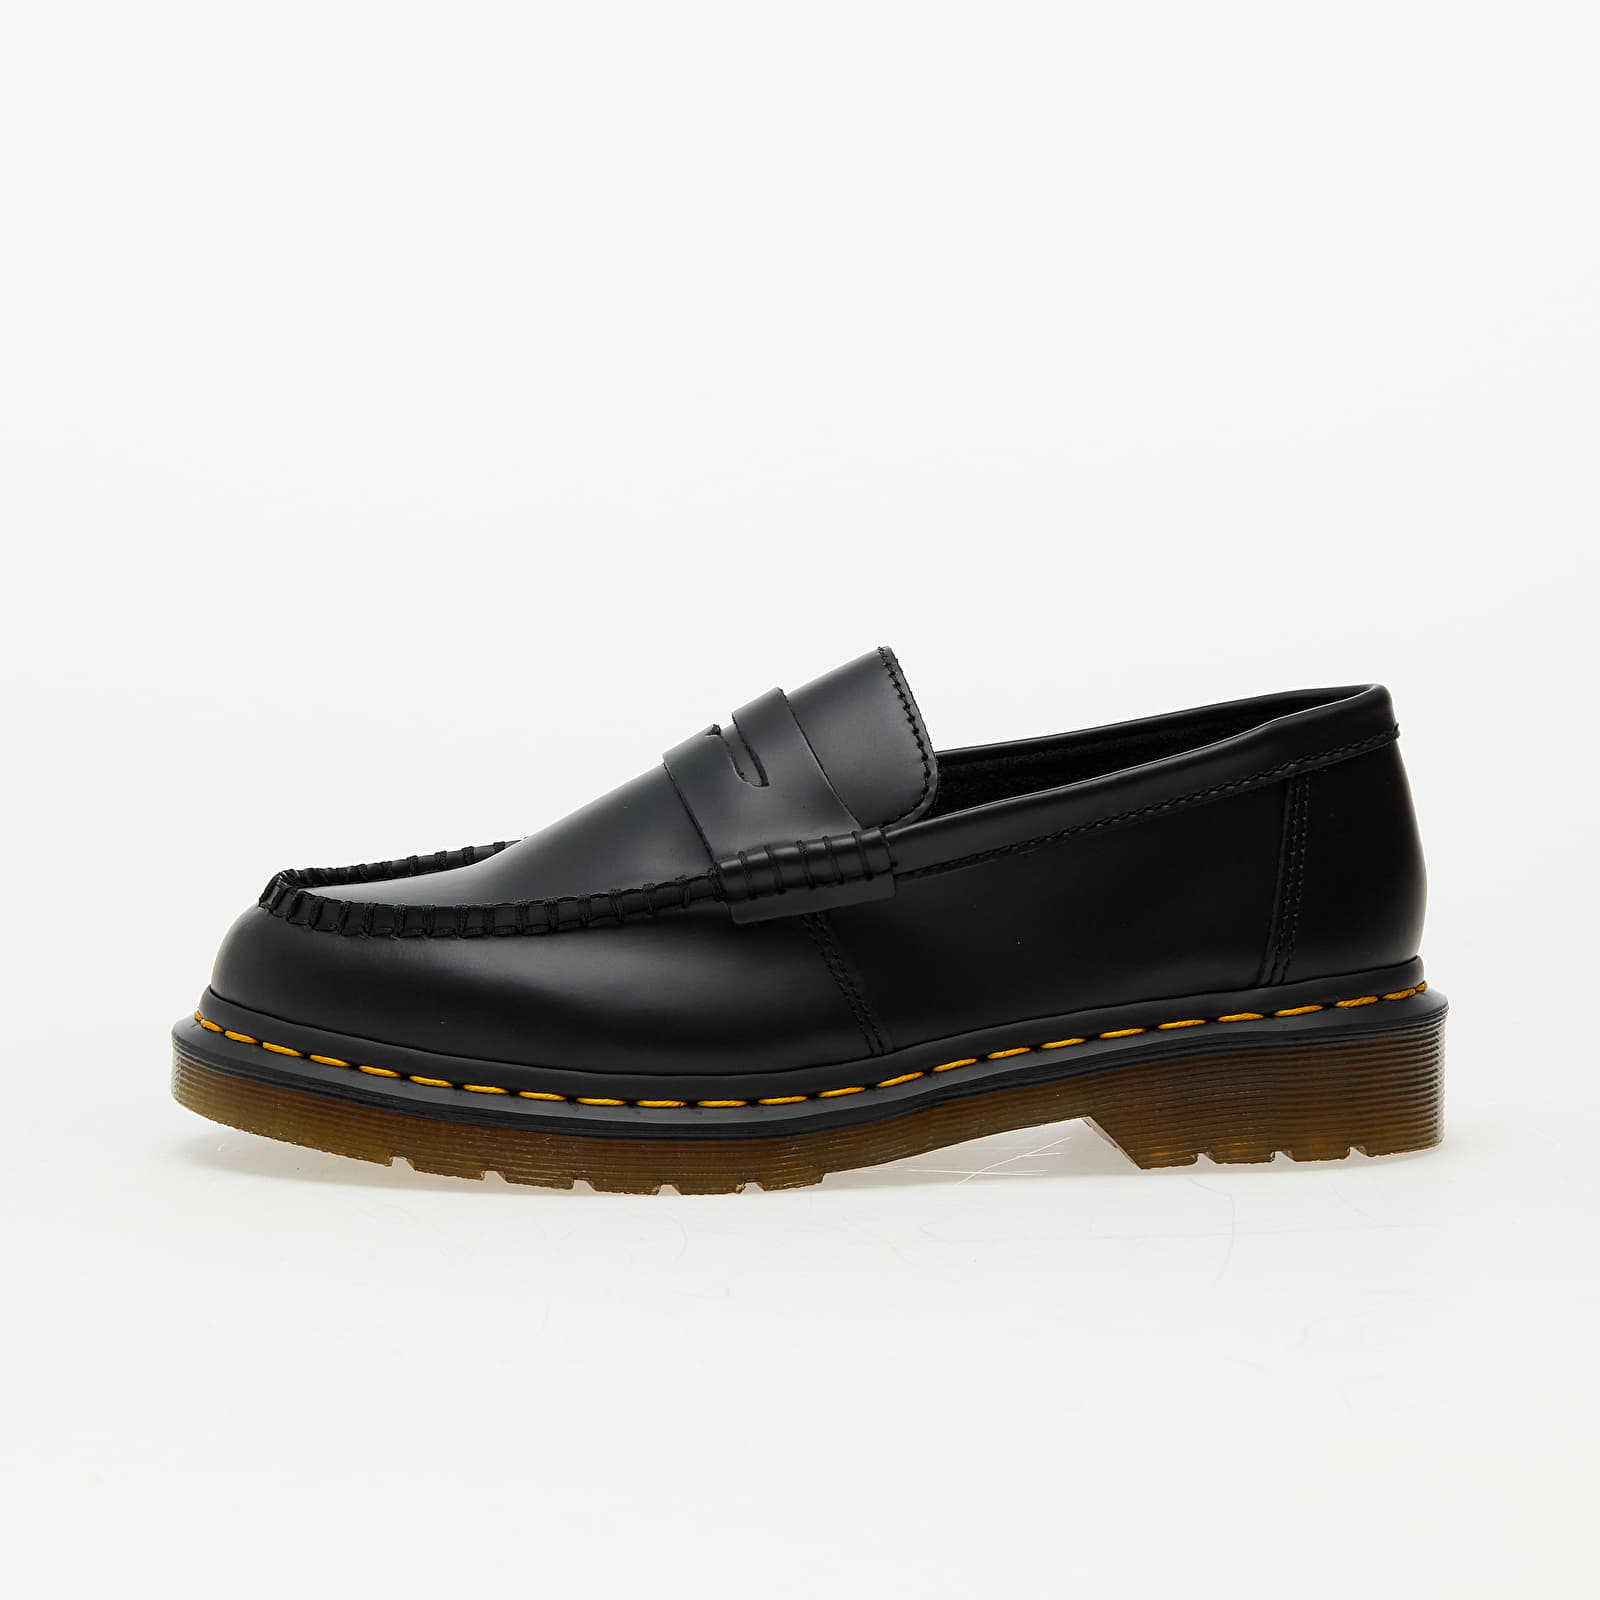 Dr. Martens Penton Smooth Leather Loafers